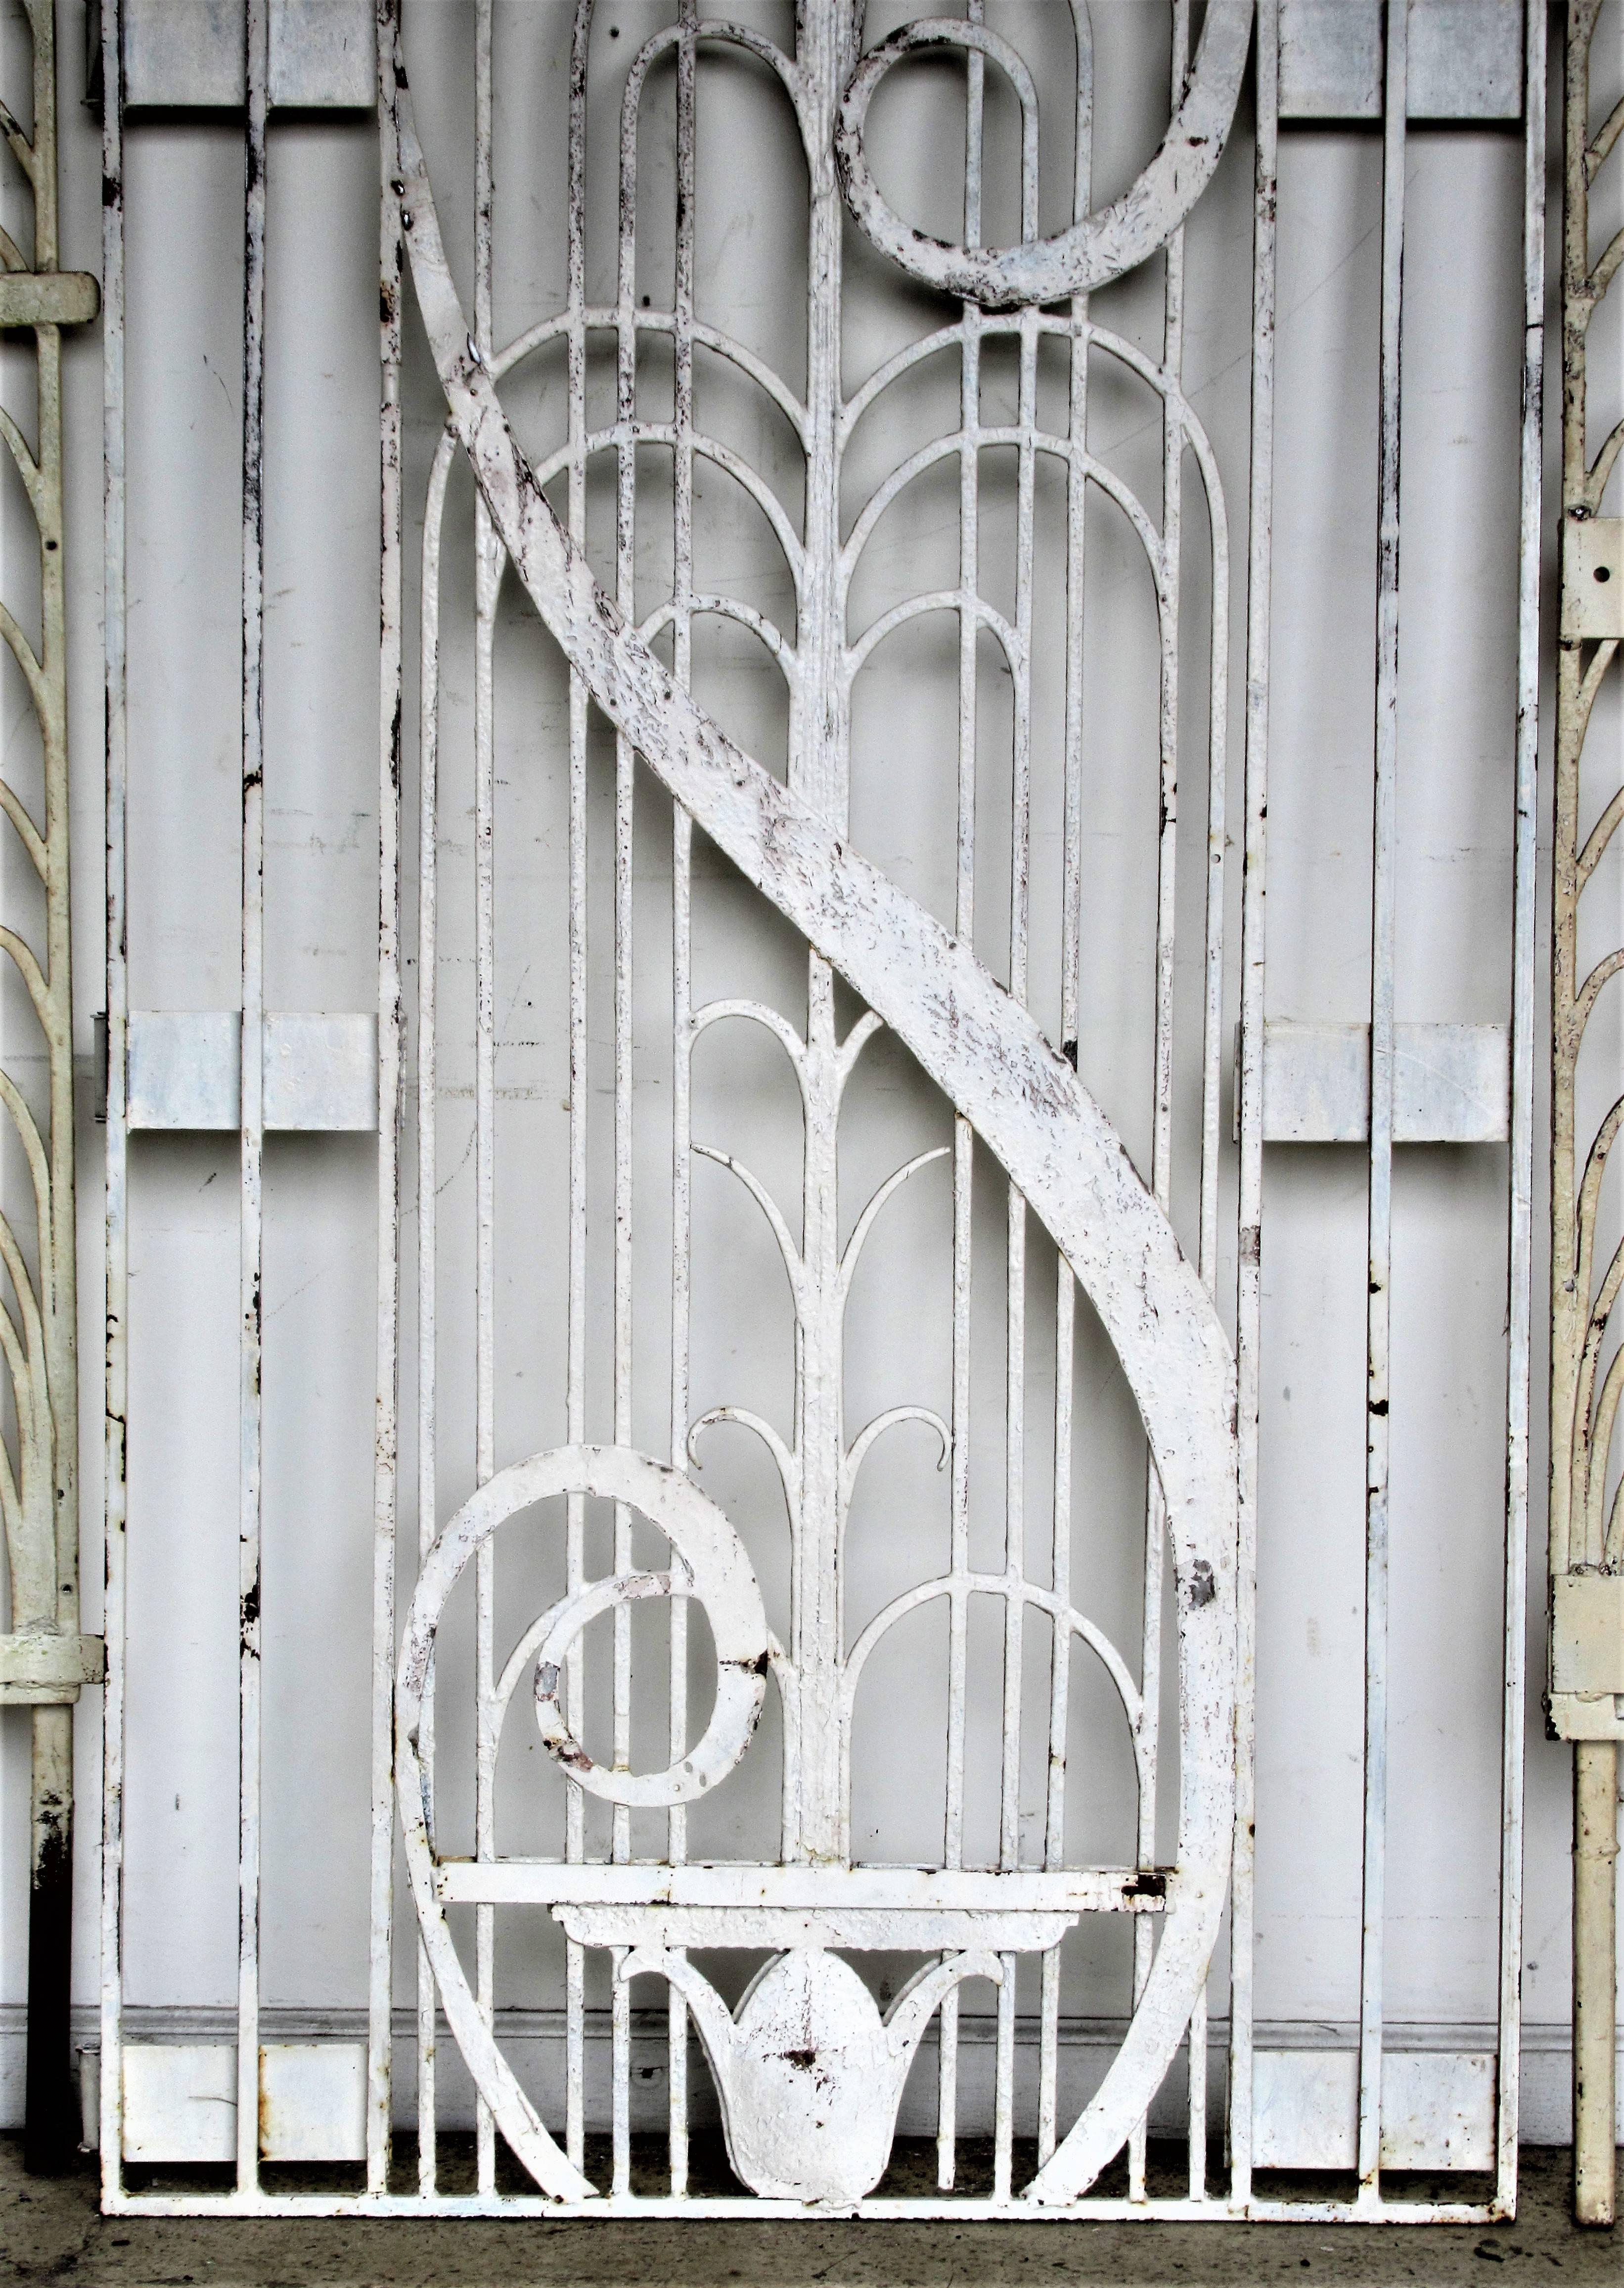 Mid-20th Century American Art Deco Architectural Hand Wrought Iron Gates